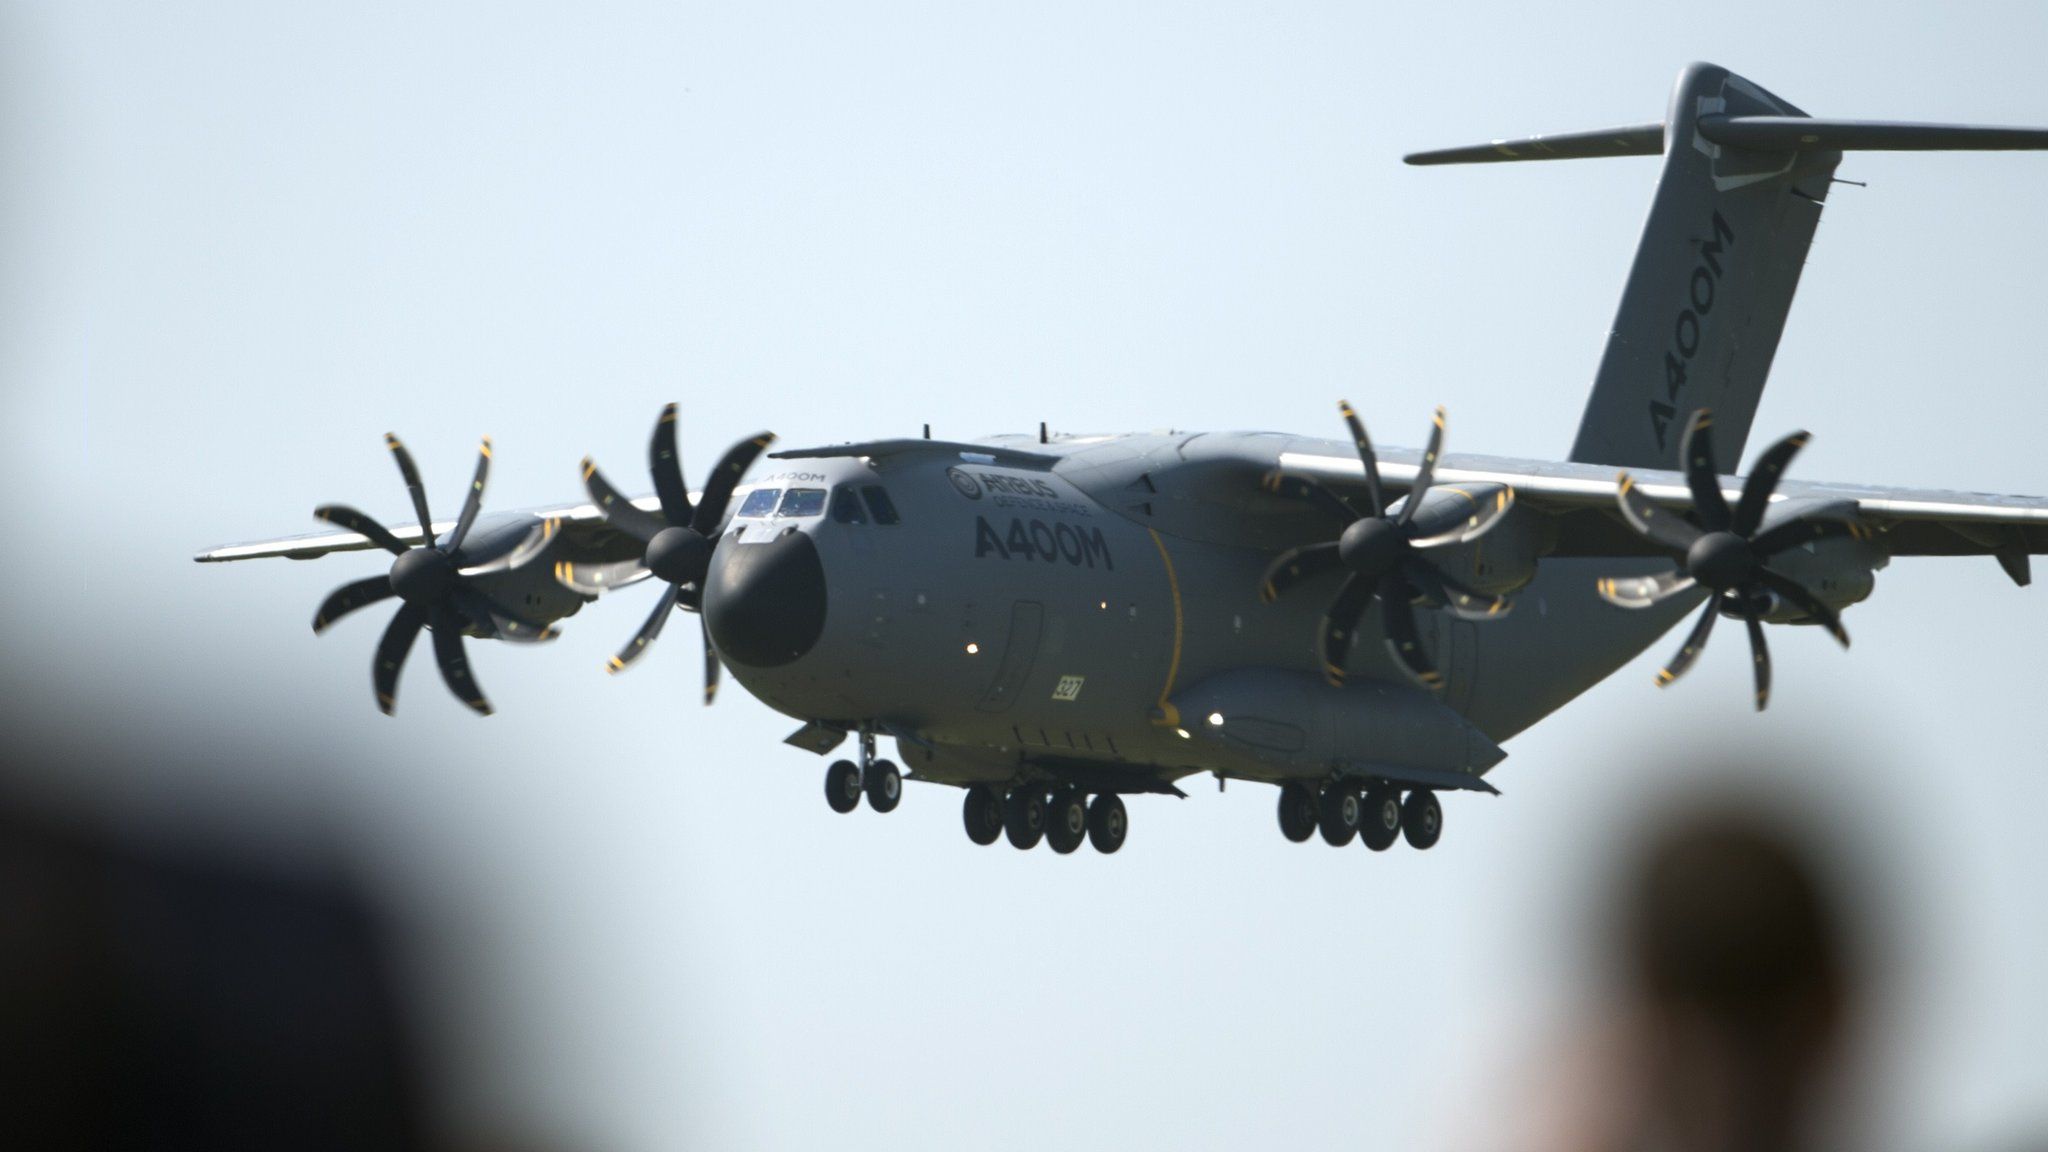 The A400 military transport plane